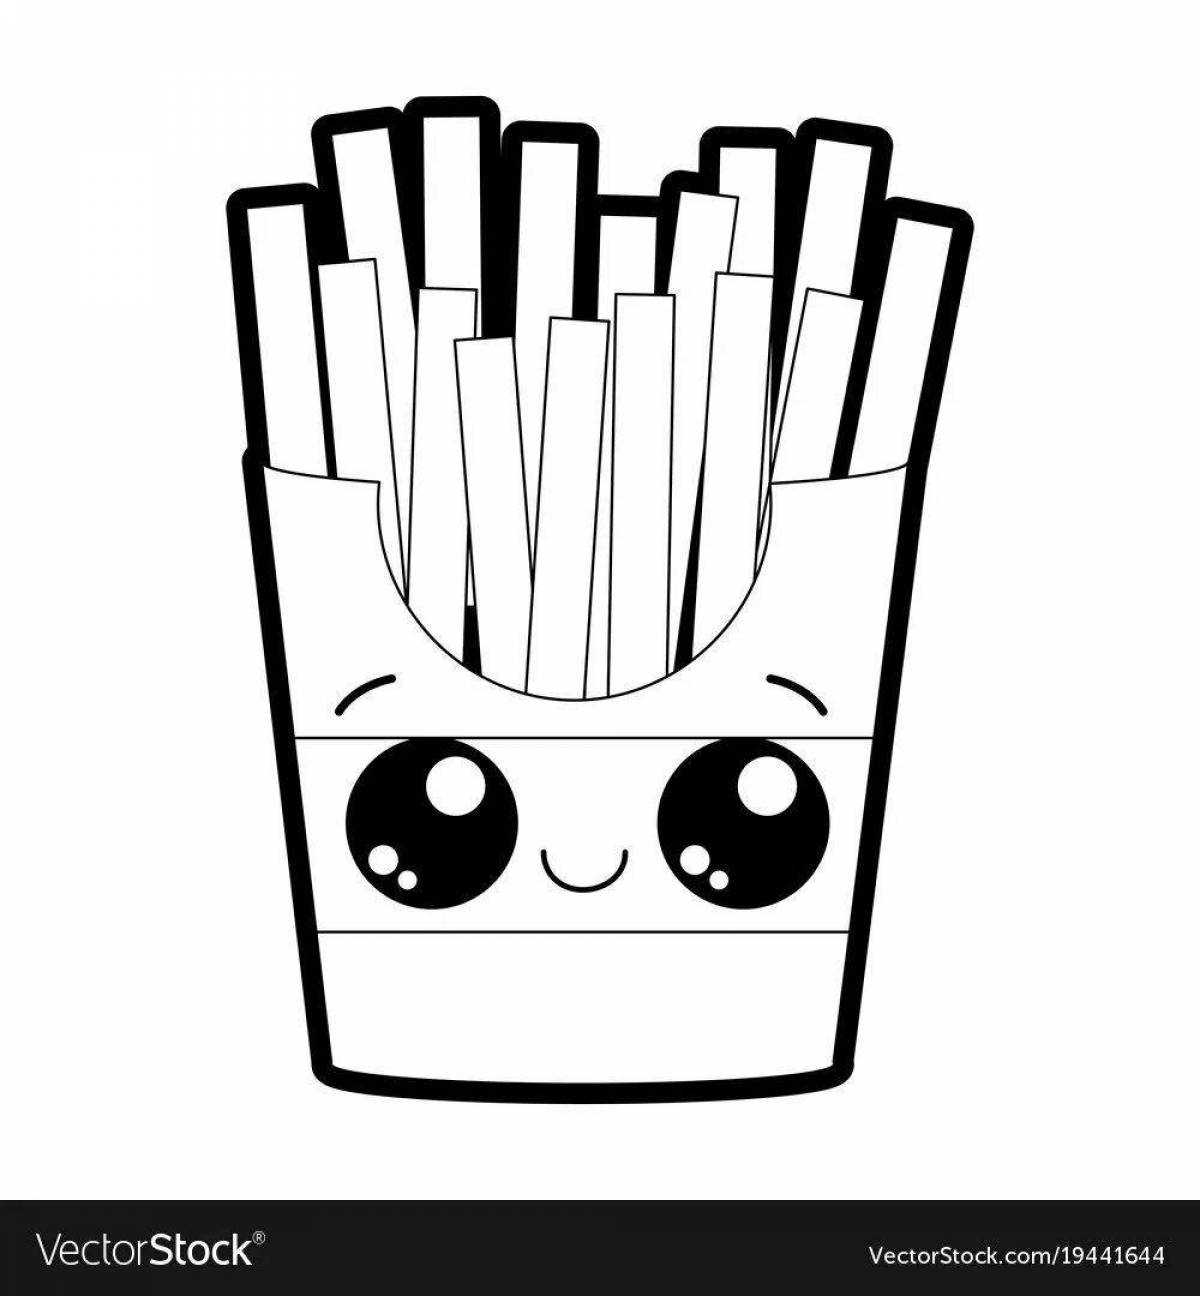 Satisfactory french fries coloring page for kids